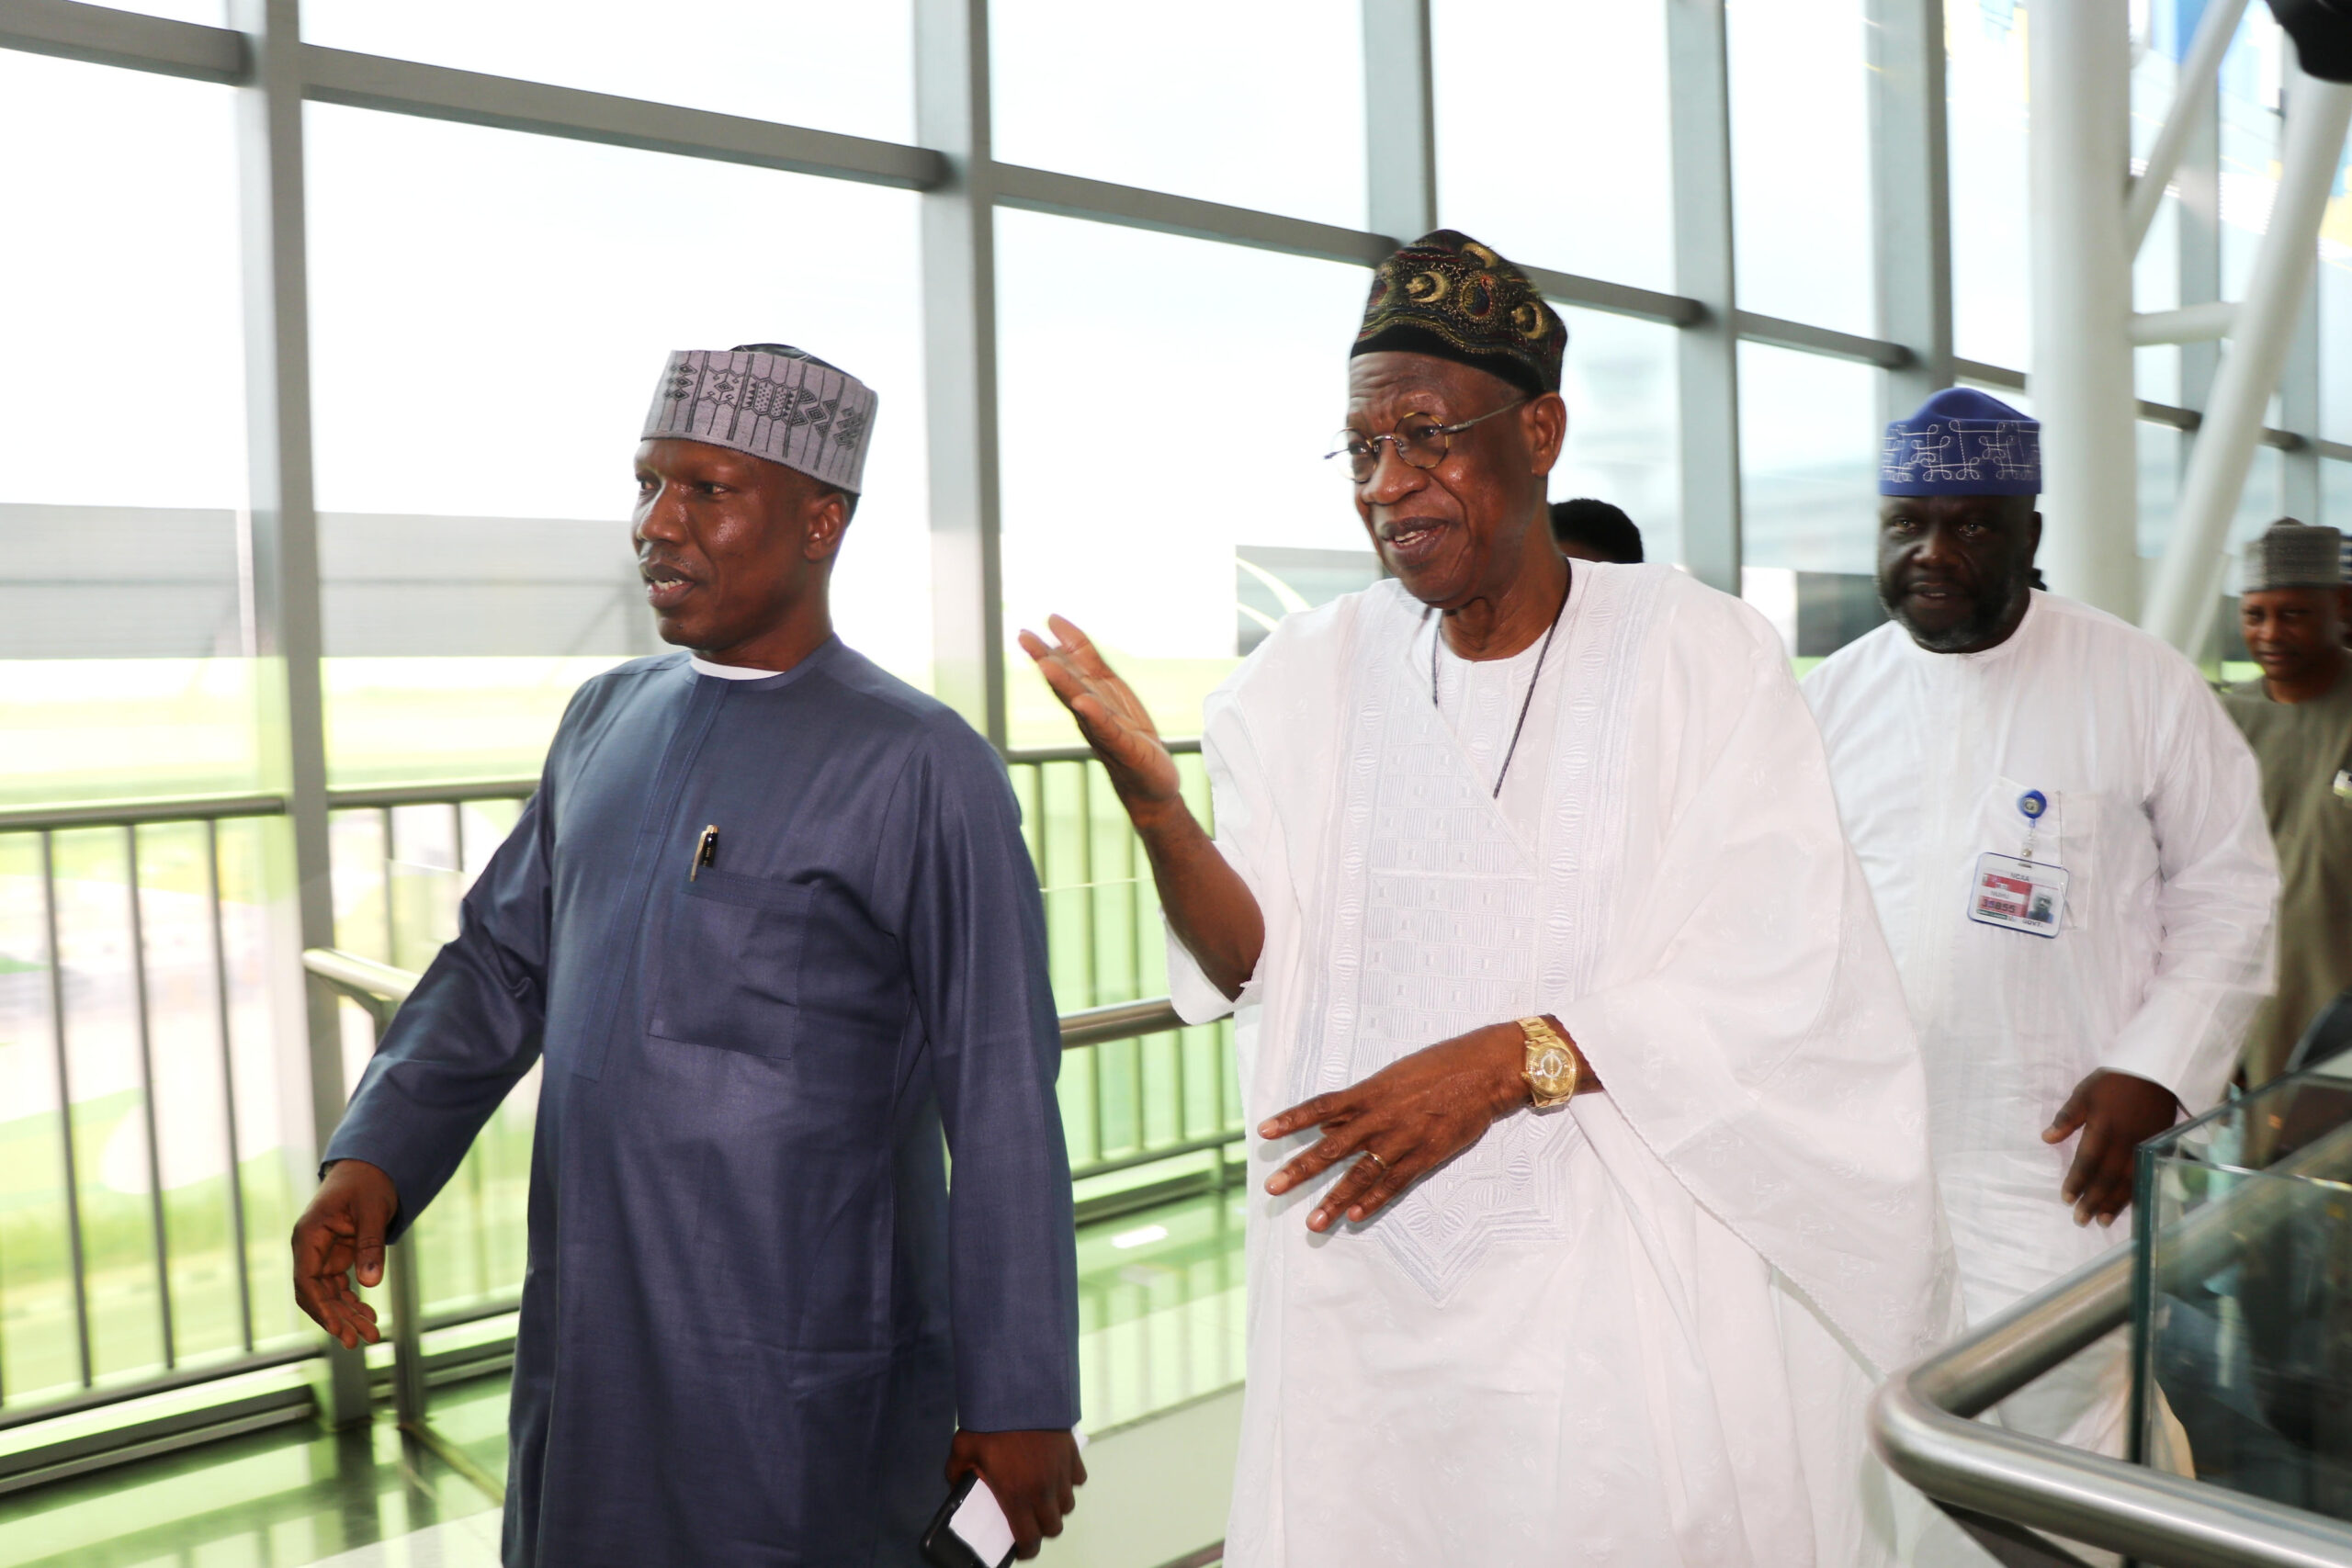 L-R: Managing Director of the Federal Airports Authority of Nigeria, Captain Rabiu Yadudu; Minister of Information and Culture, Alhaji Lai Mohammed and the Director General of the Nigeria Civil Aviation Authority, Captain Musa Nuhu, during a media tour of the newly-completed Terminal 2 at the Murtala Muhammed International Airport, Lagos, on Monday